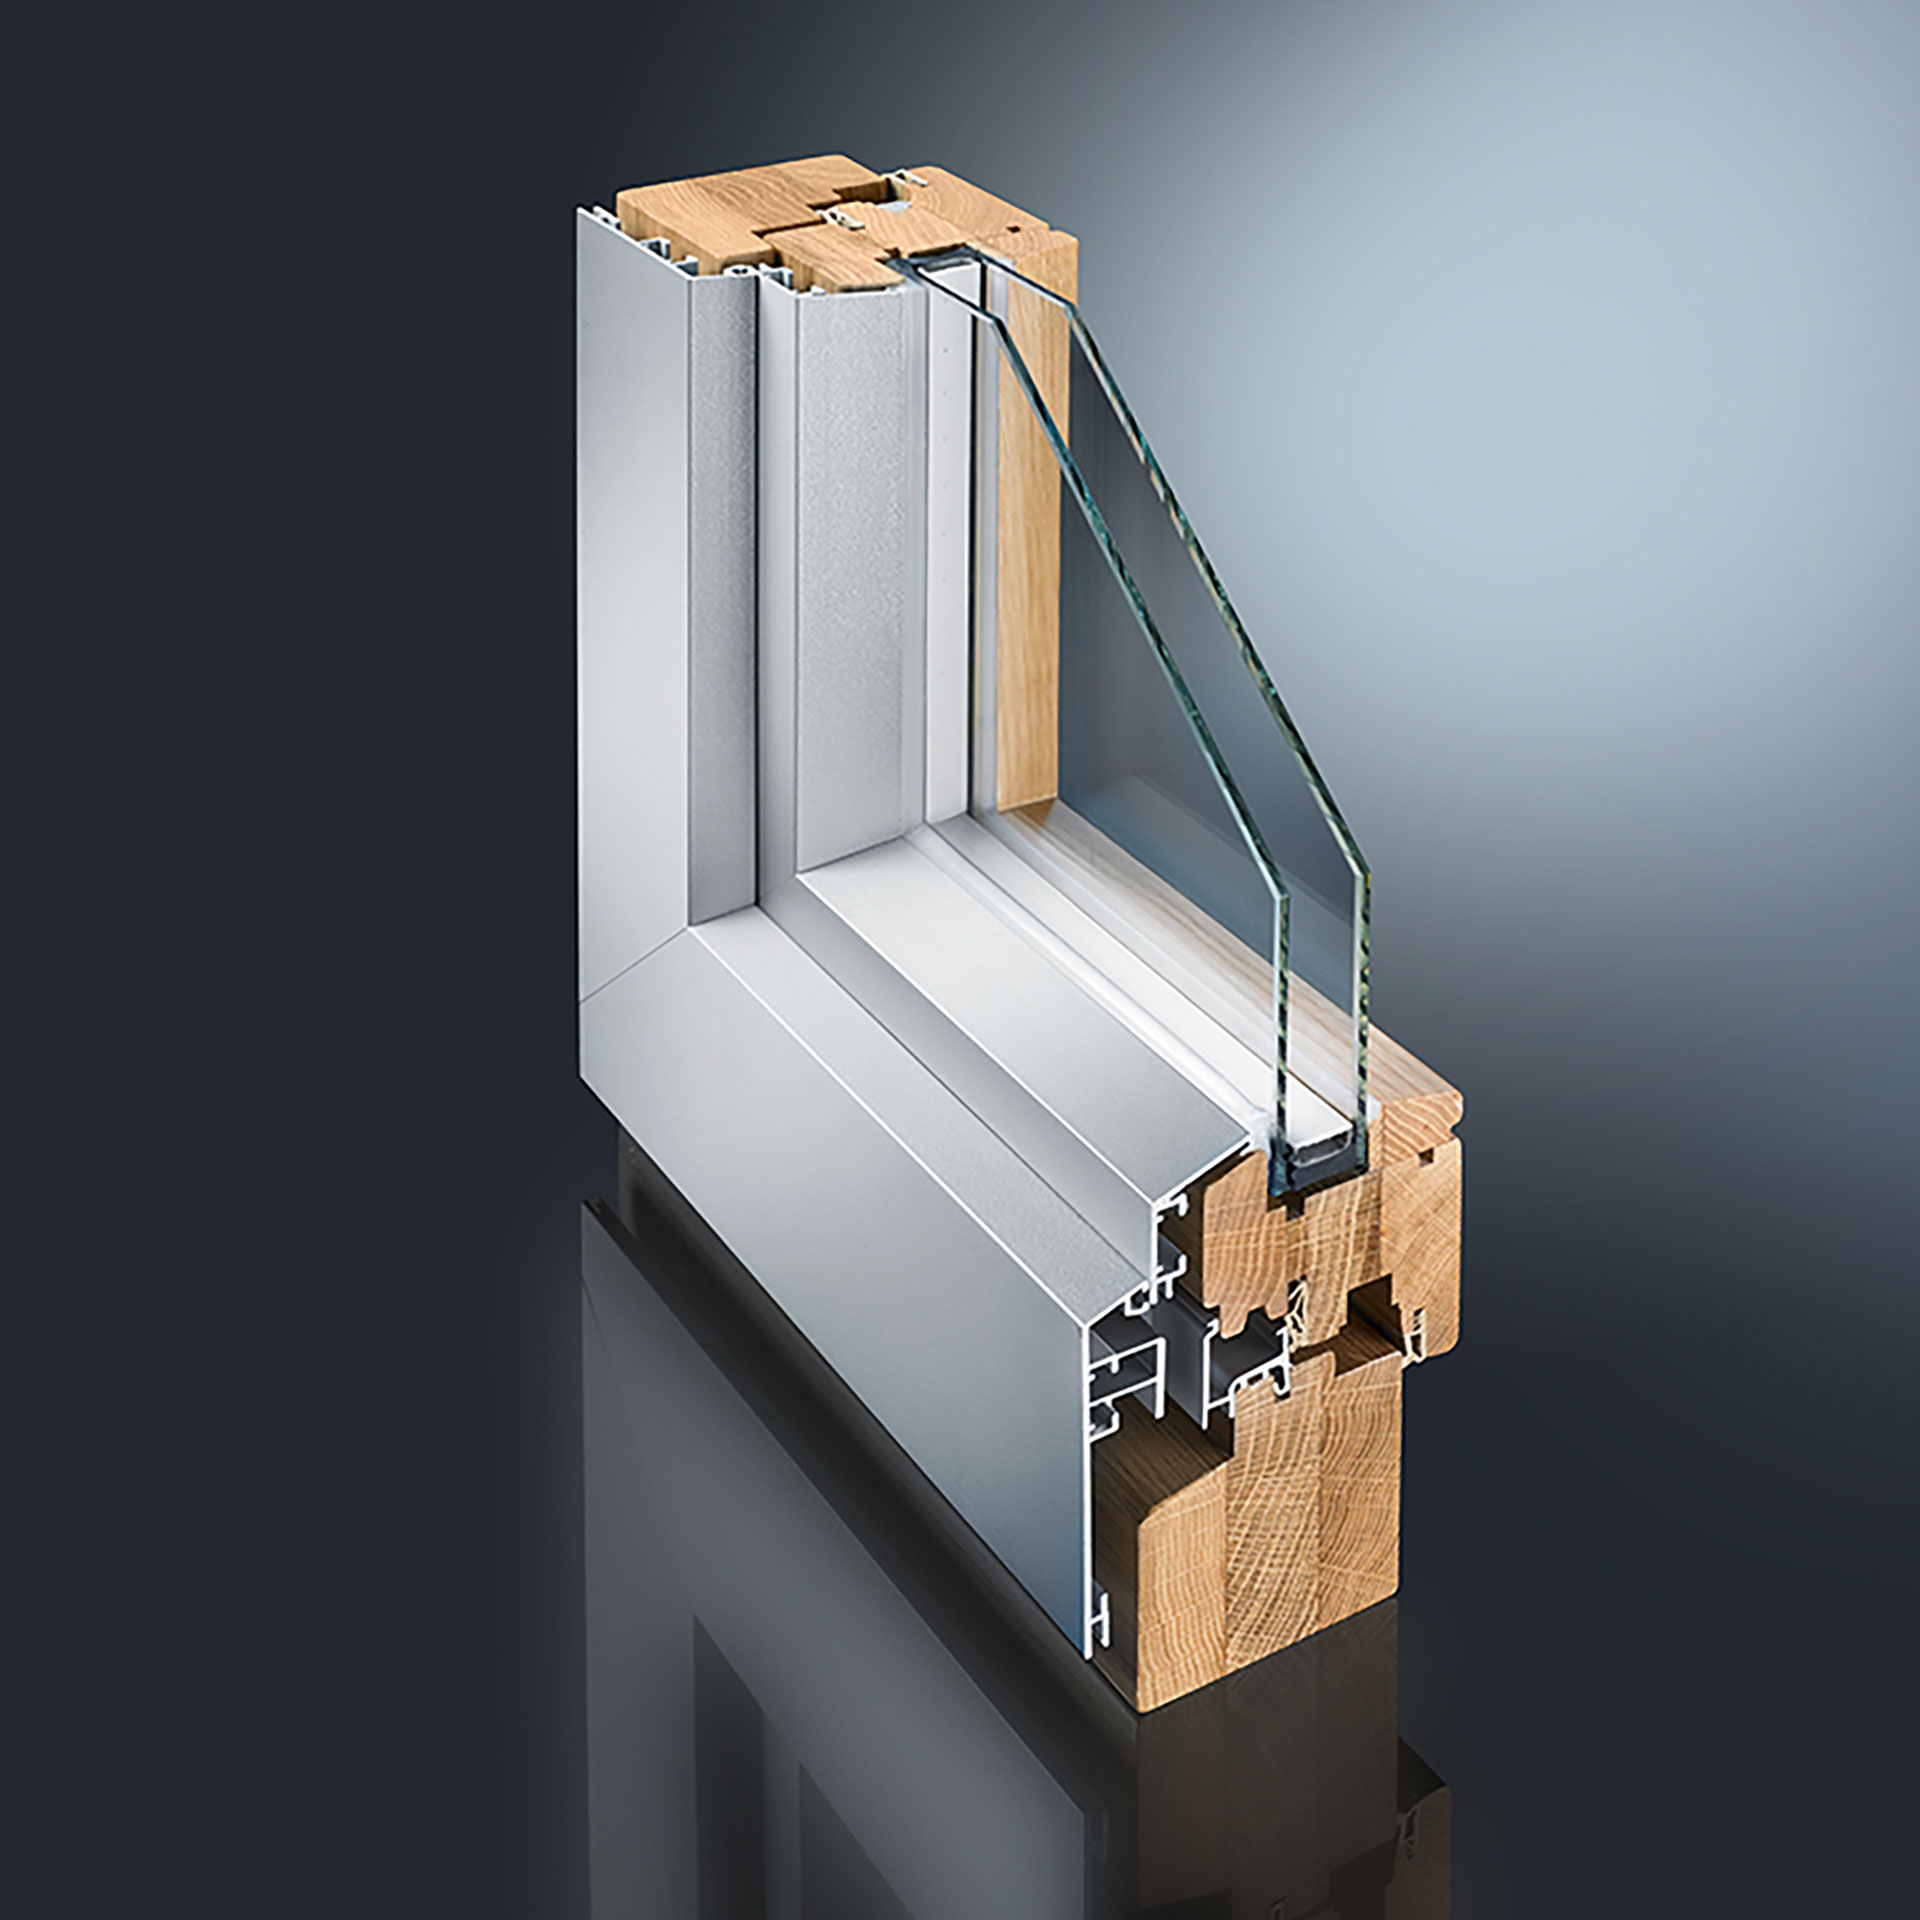 The profile system CORA is a high-performance, versatile aluminium system for the long-lasting protection and modernization and renovation of wooden windows. Wood windows can be fitted with attractive-looking weatherproofing simply and quickly. 